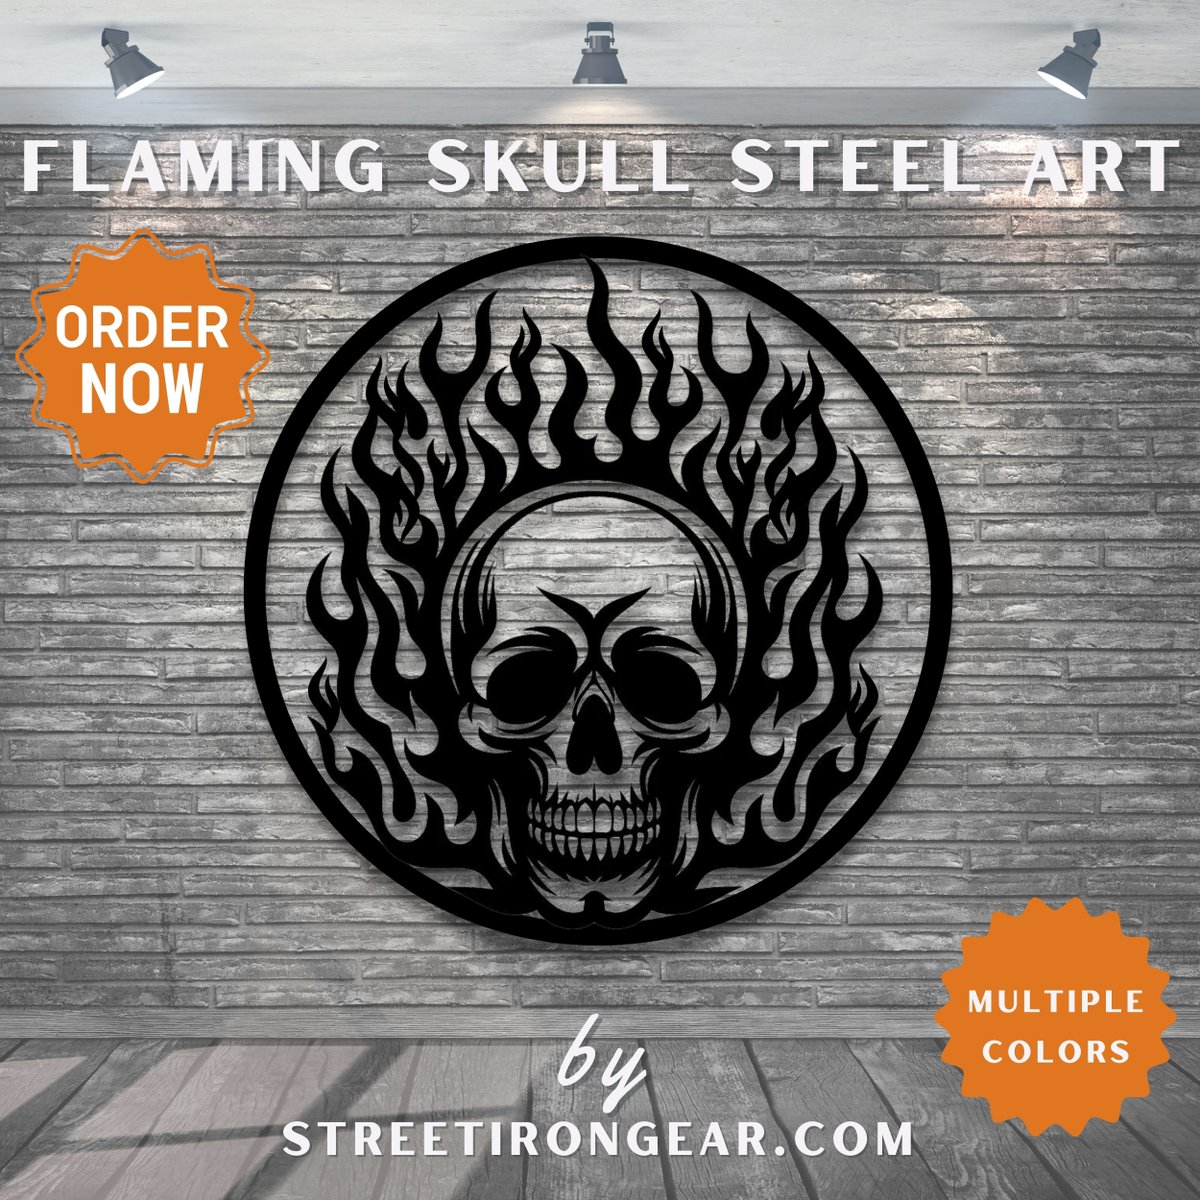 Turn up the heat in your space with our Flaming Skull Steel Metal Art  Great for garages or outdoor vibes.

#StreetIronGear #MetalArt #HomeDecor #GarageDecor #OutdoorStyle #ArtLovers #UniqueDecor #FathersDay #GiftsForDad 

Shop TODAY!
buff.ly/4aBJ6Qp